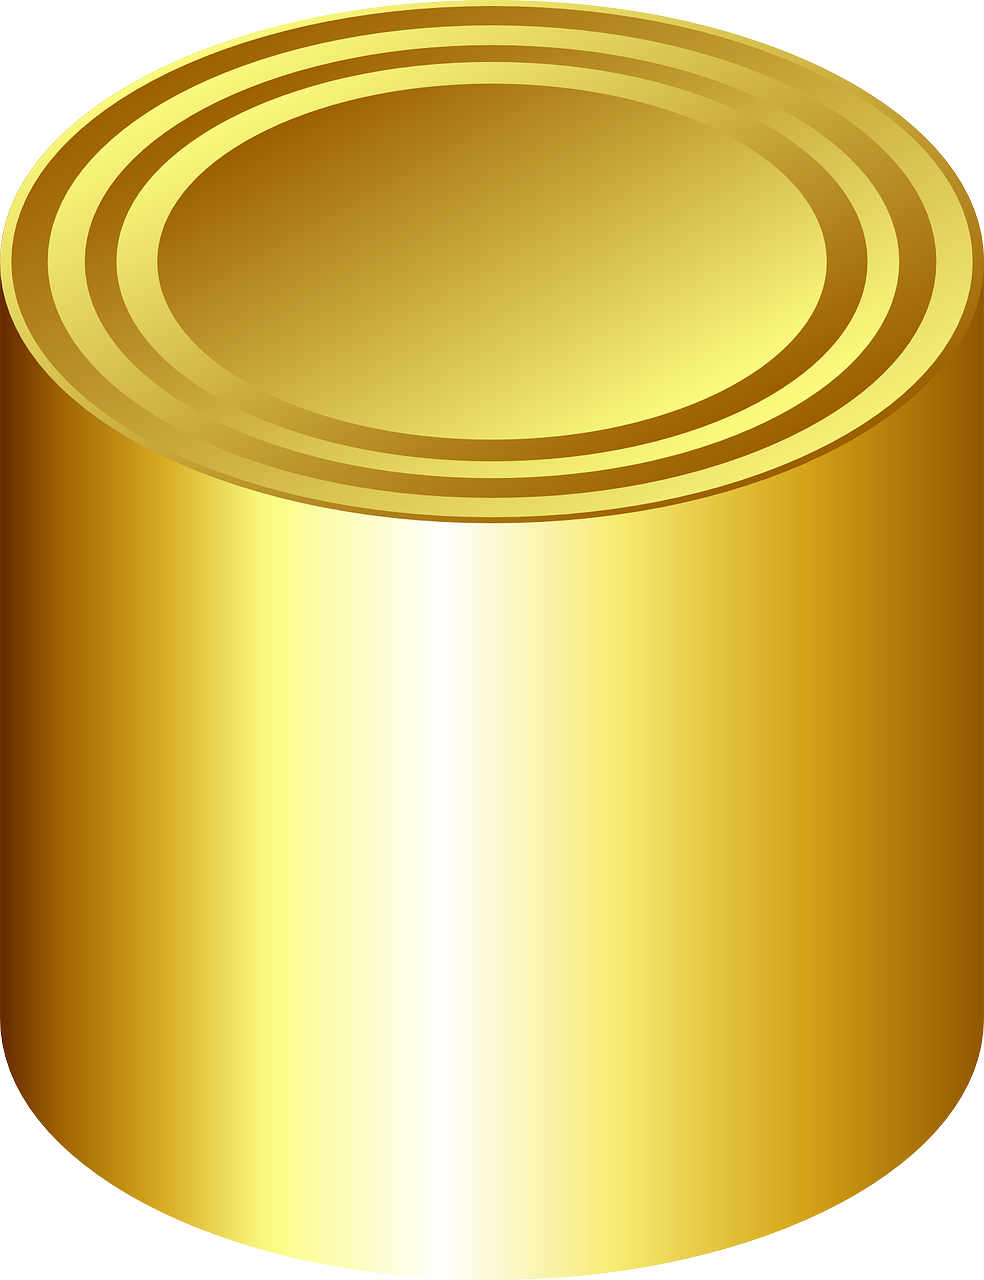 canned food can cylinder free photo